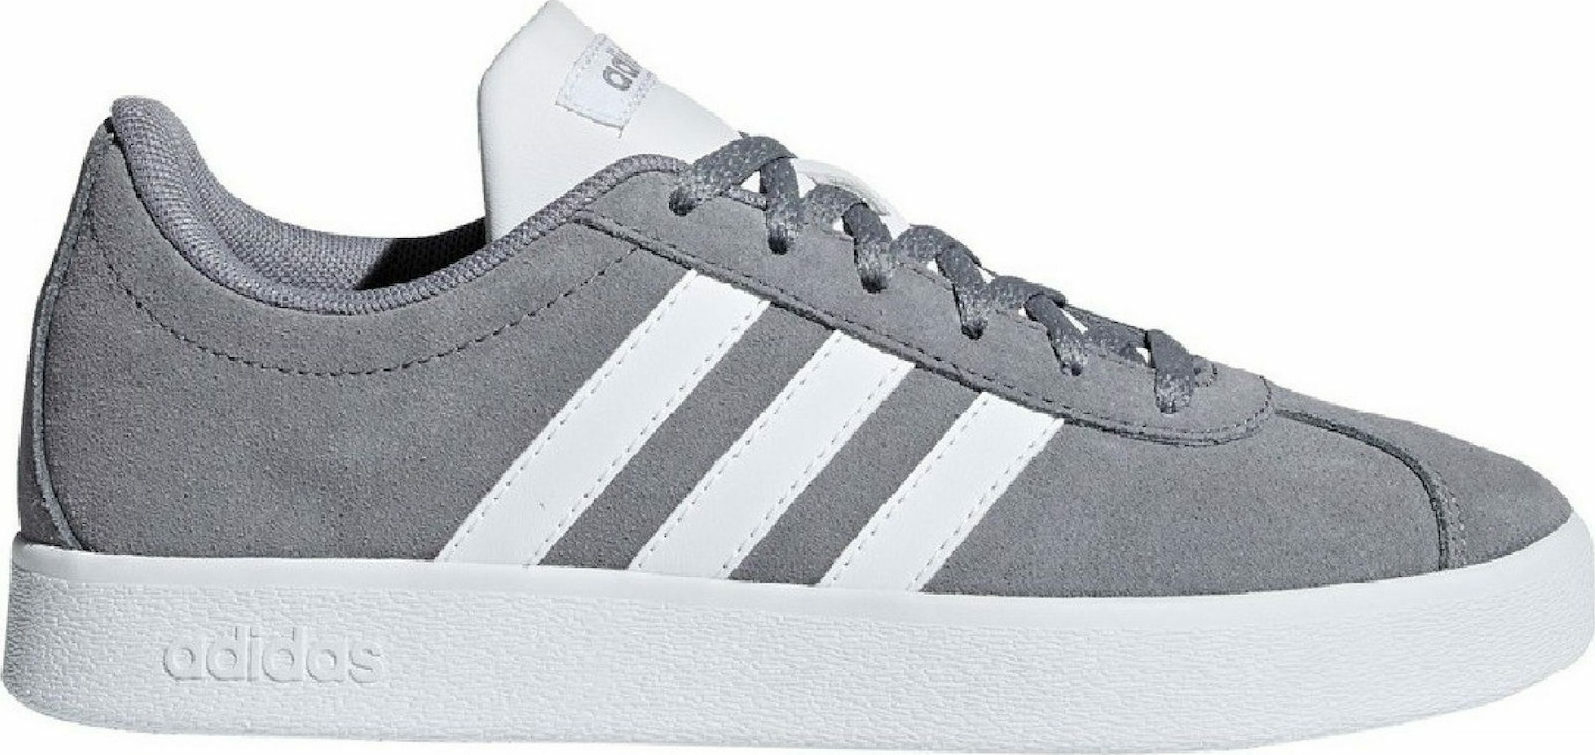 Scatter Do well () Shiny Adidas Παιδικά Sneakers Court 2.0 Γκρι B75692 | Skroutz.gr